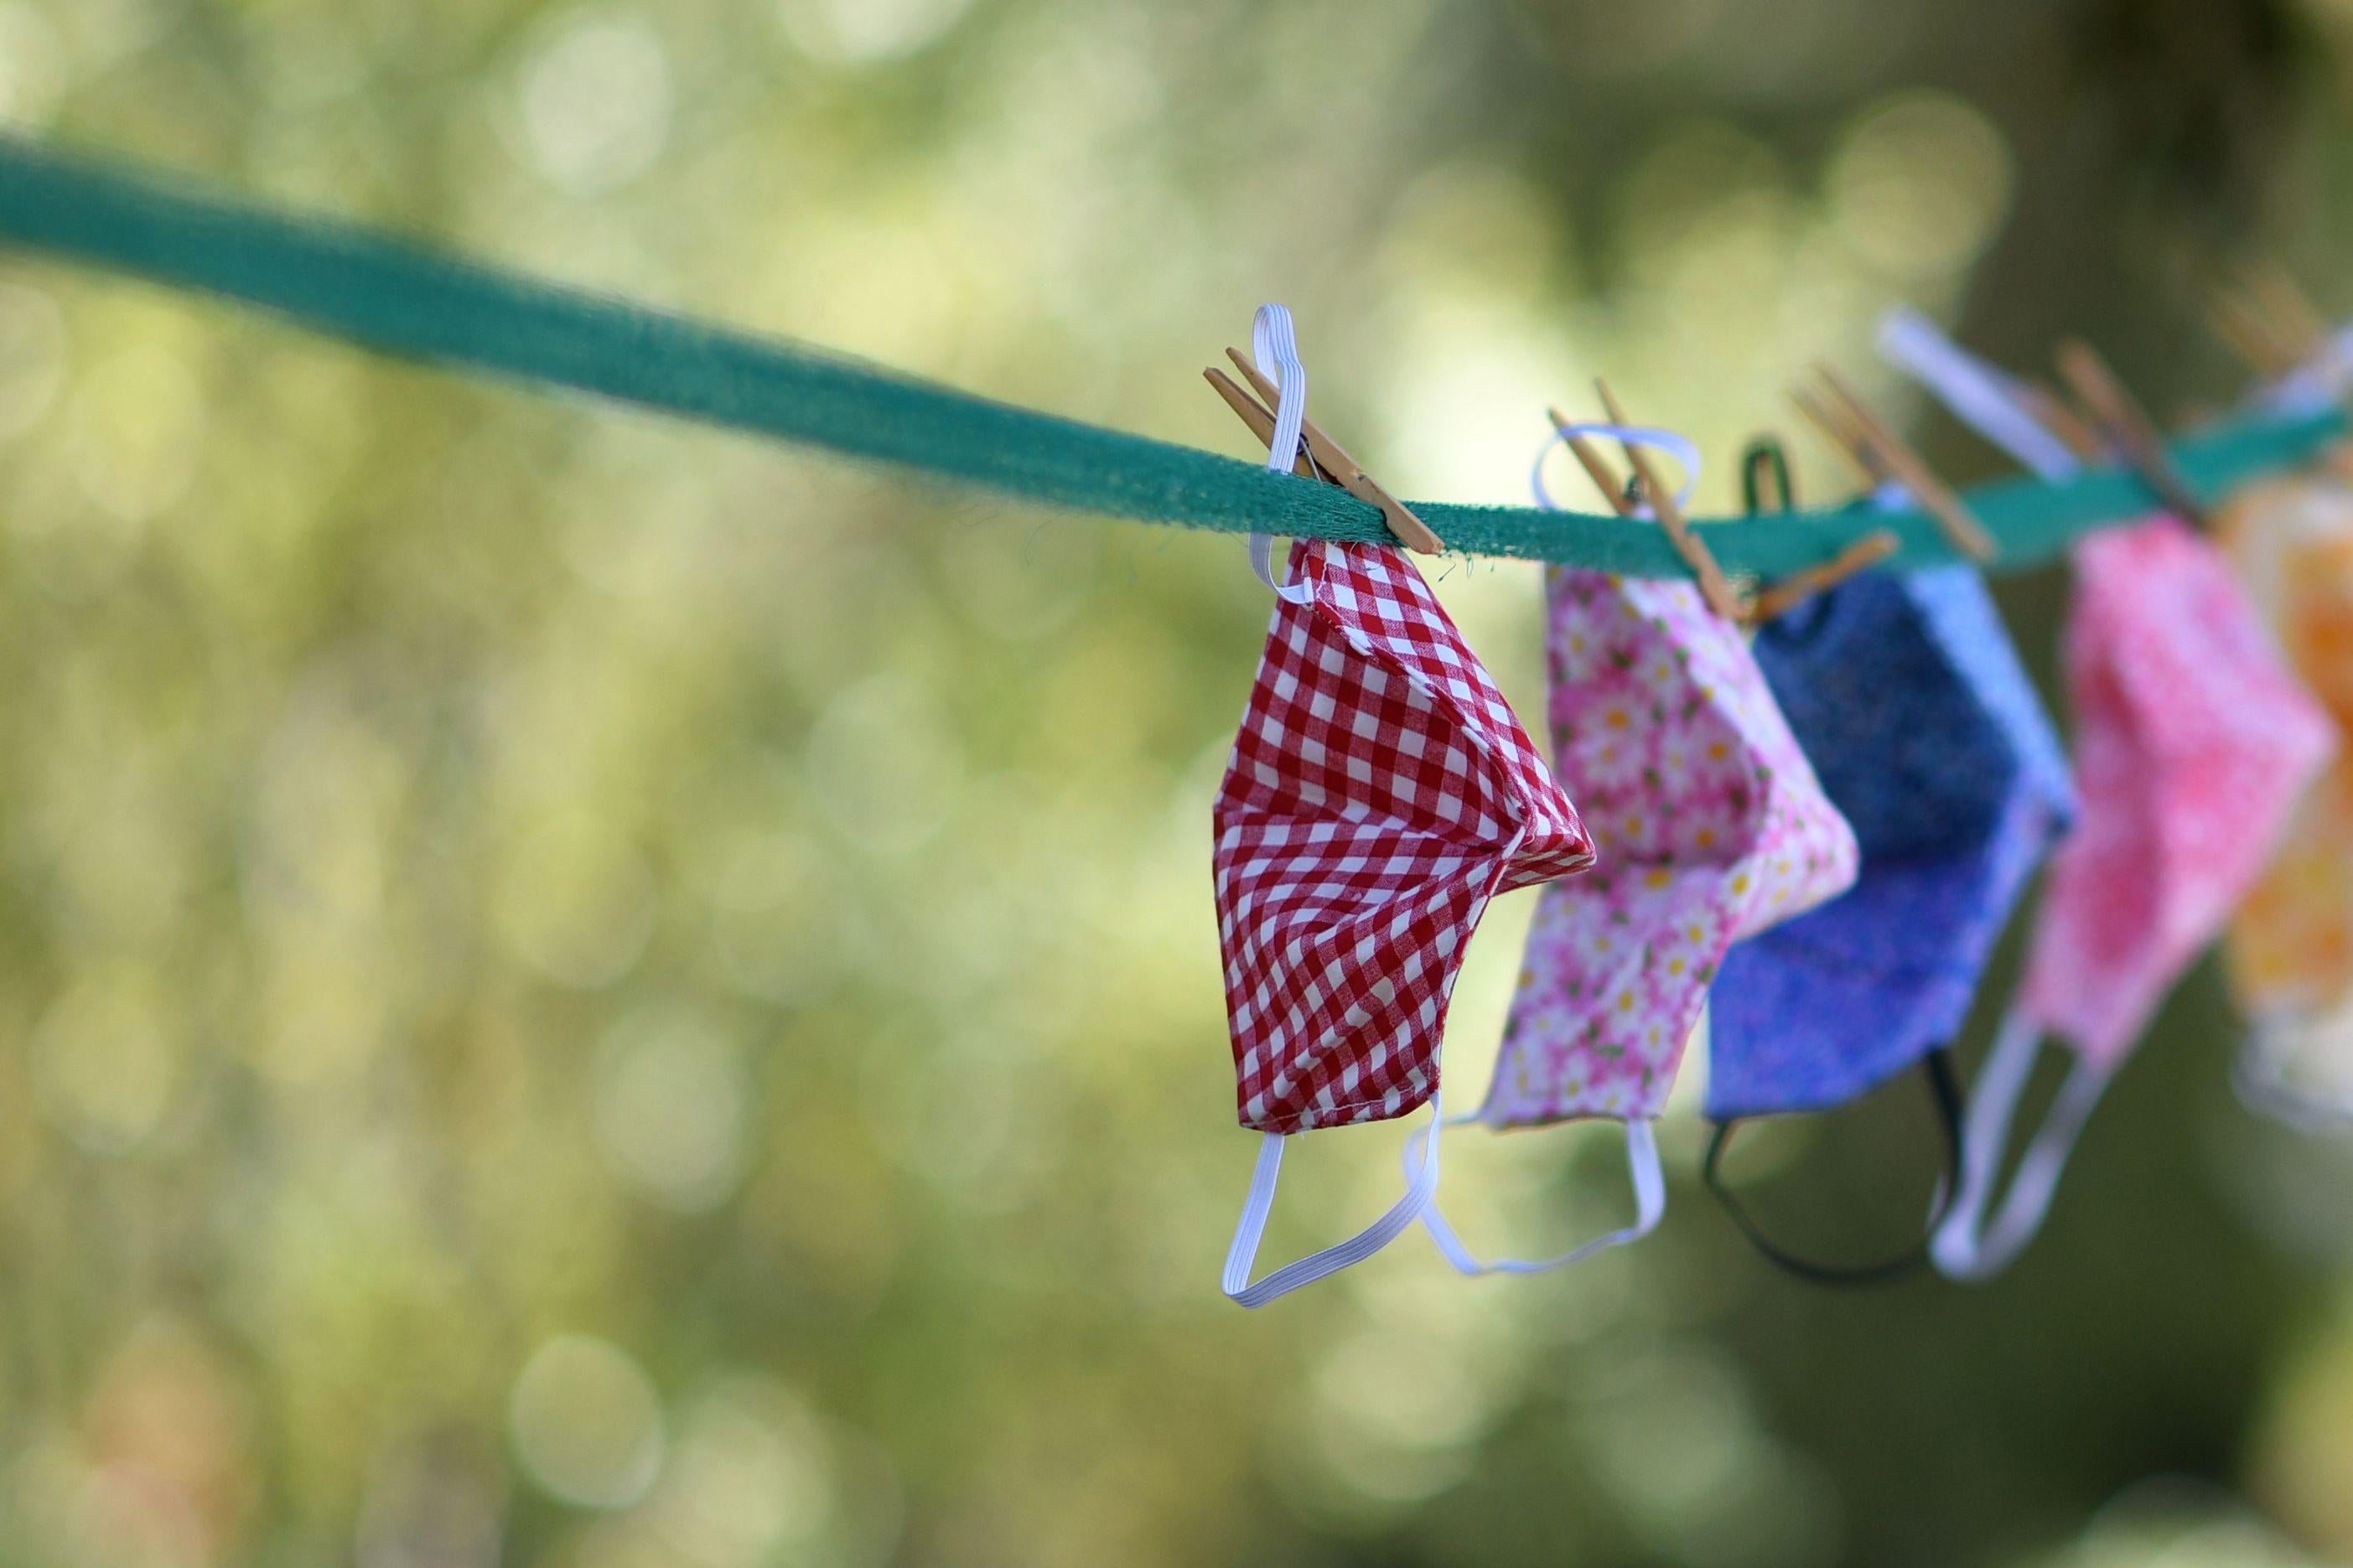 Masks hang on an outdoor clothesline.